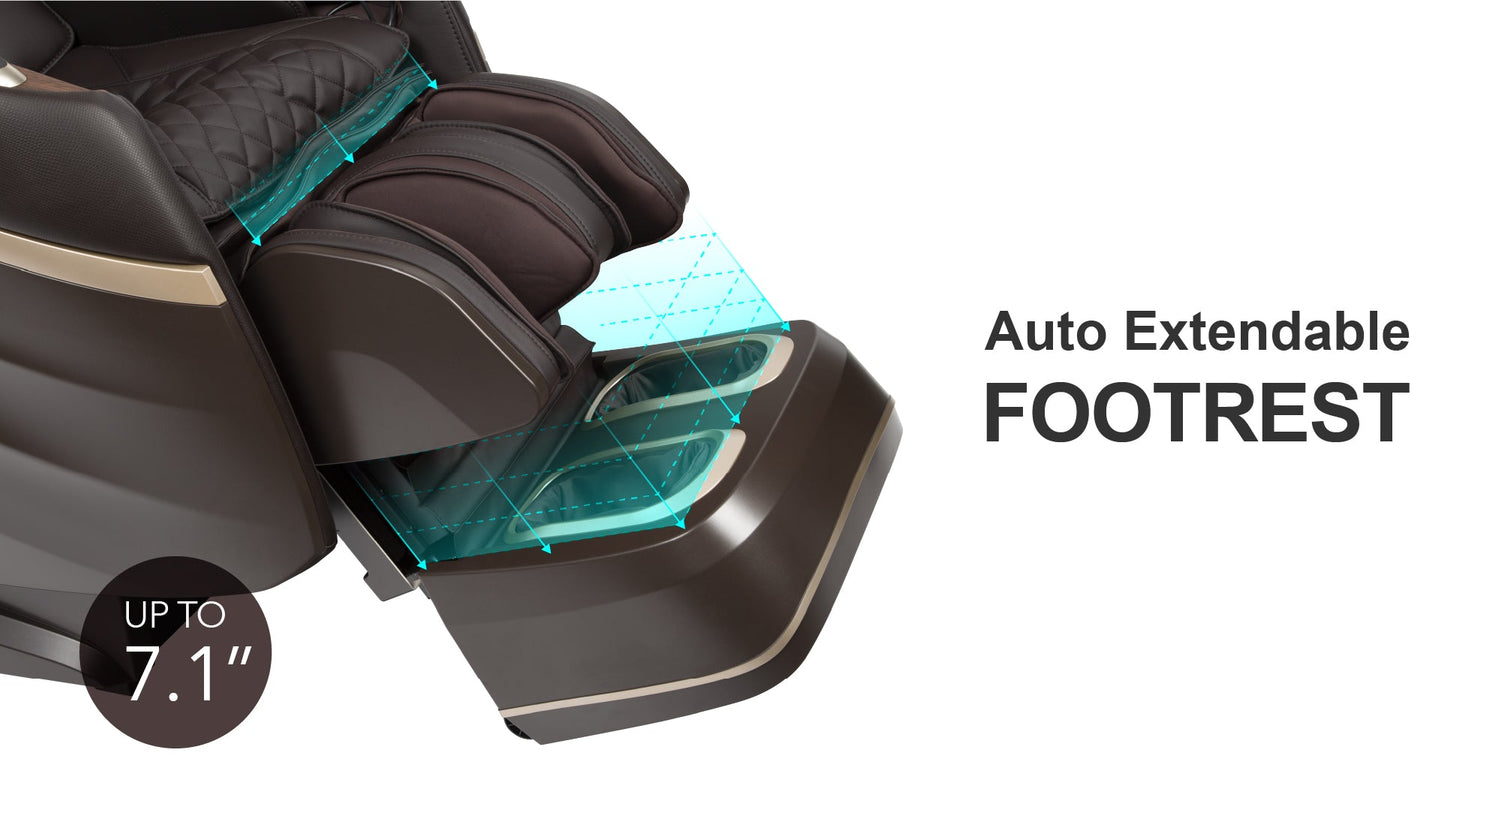 The Amamedic Hilux 4D Massage Chair has an auto-extendable footrest allowing the length of your desired position. 